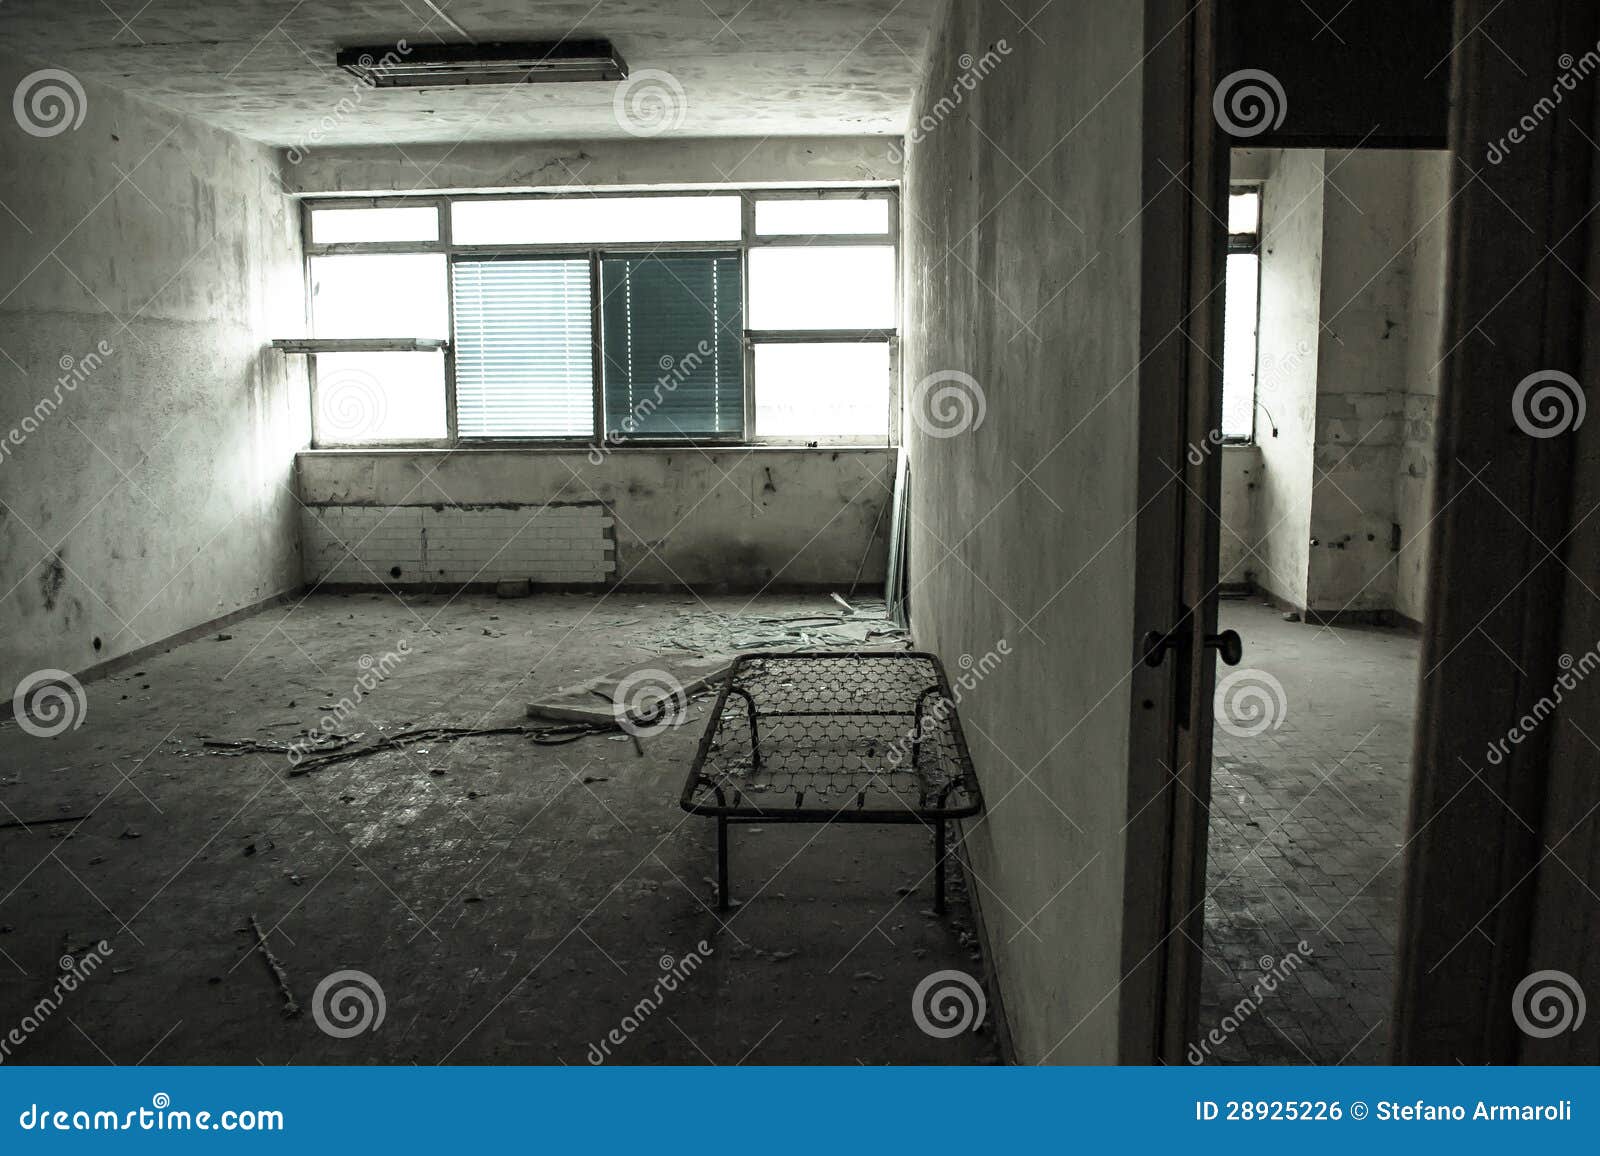 Remains of an old bed stock photo. Image of interior - 28925226